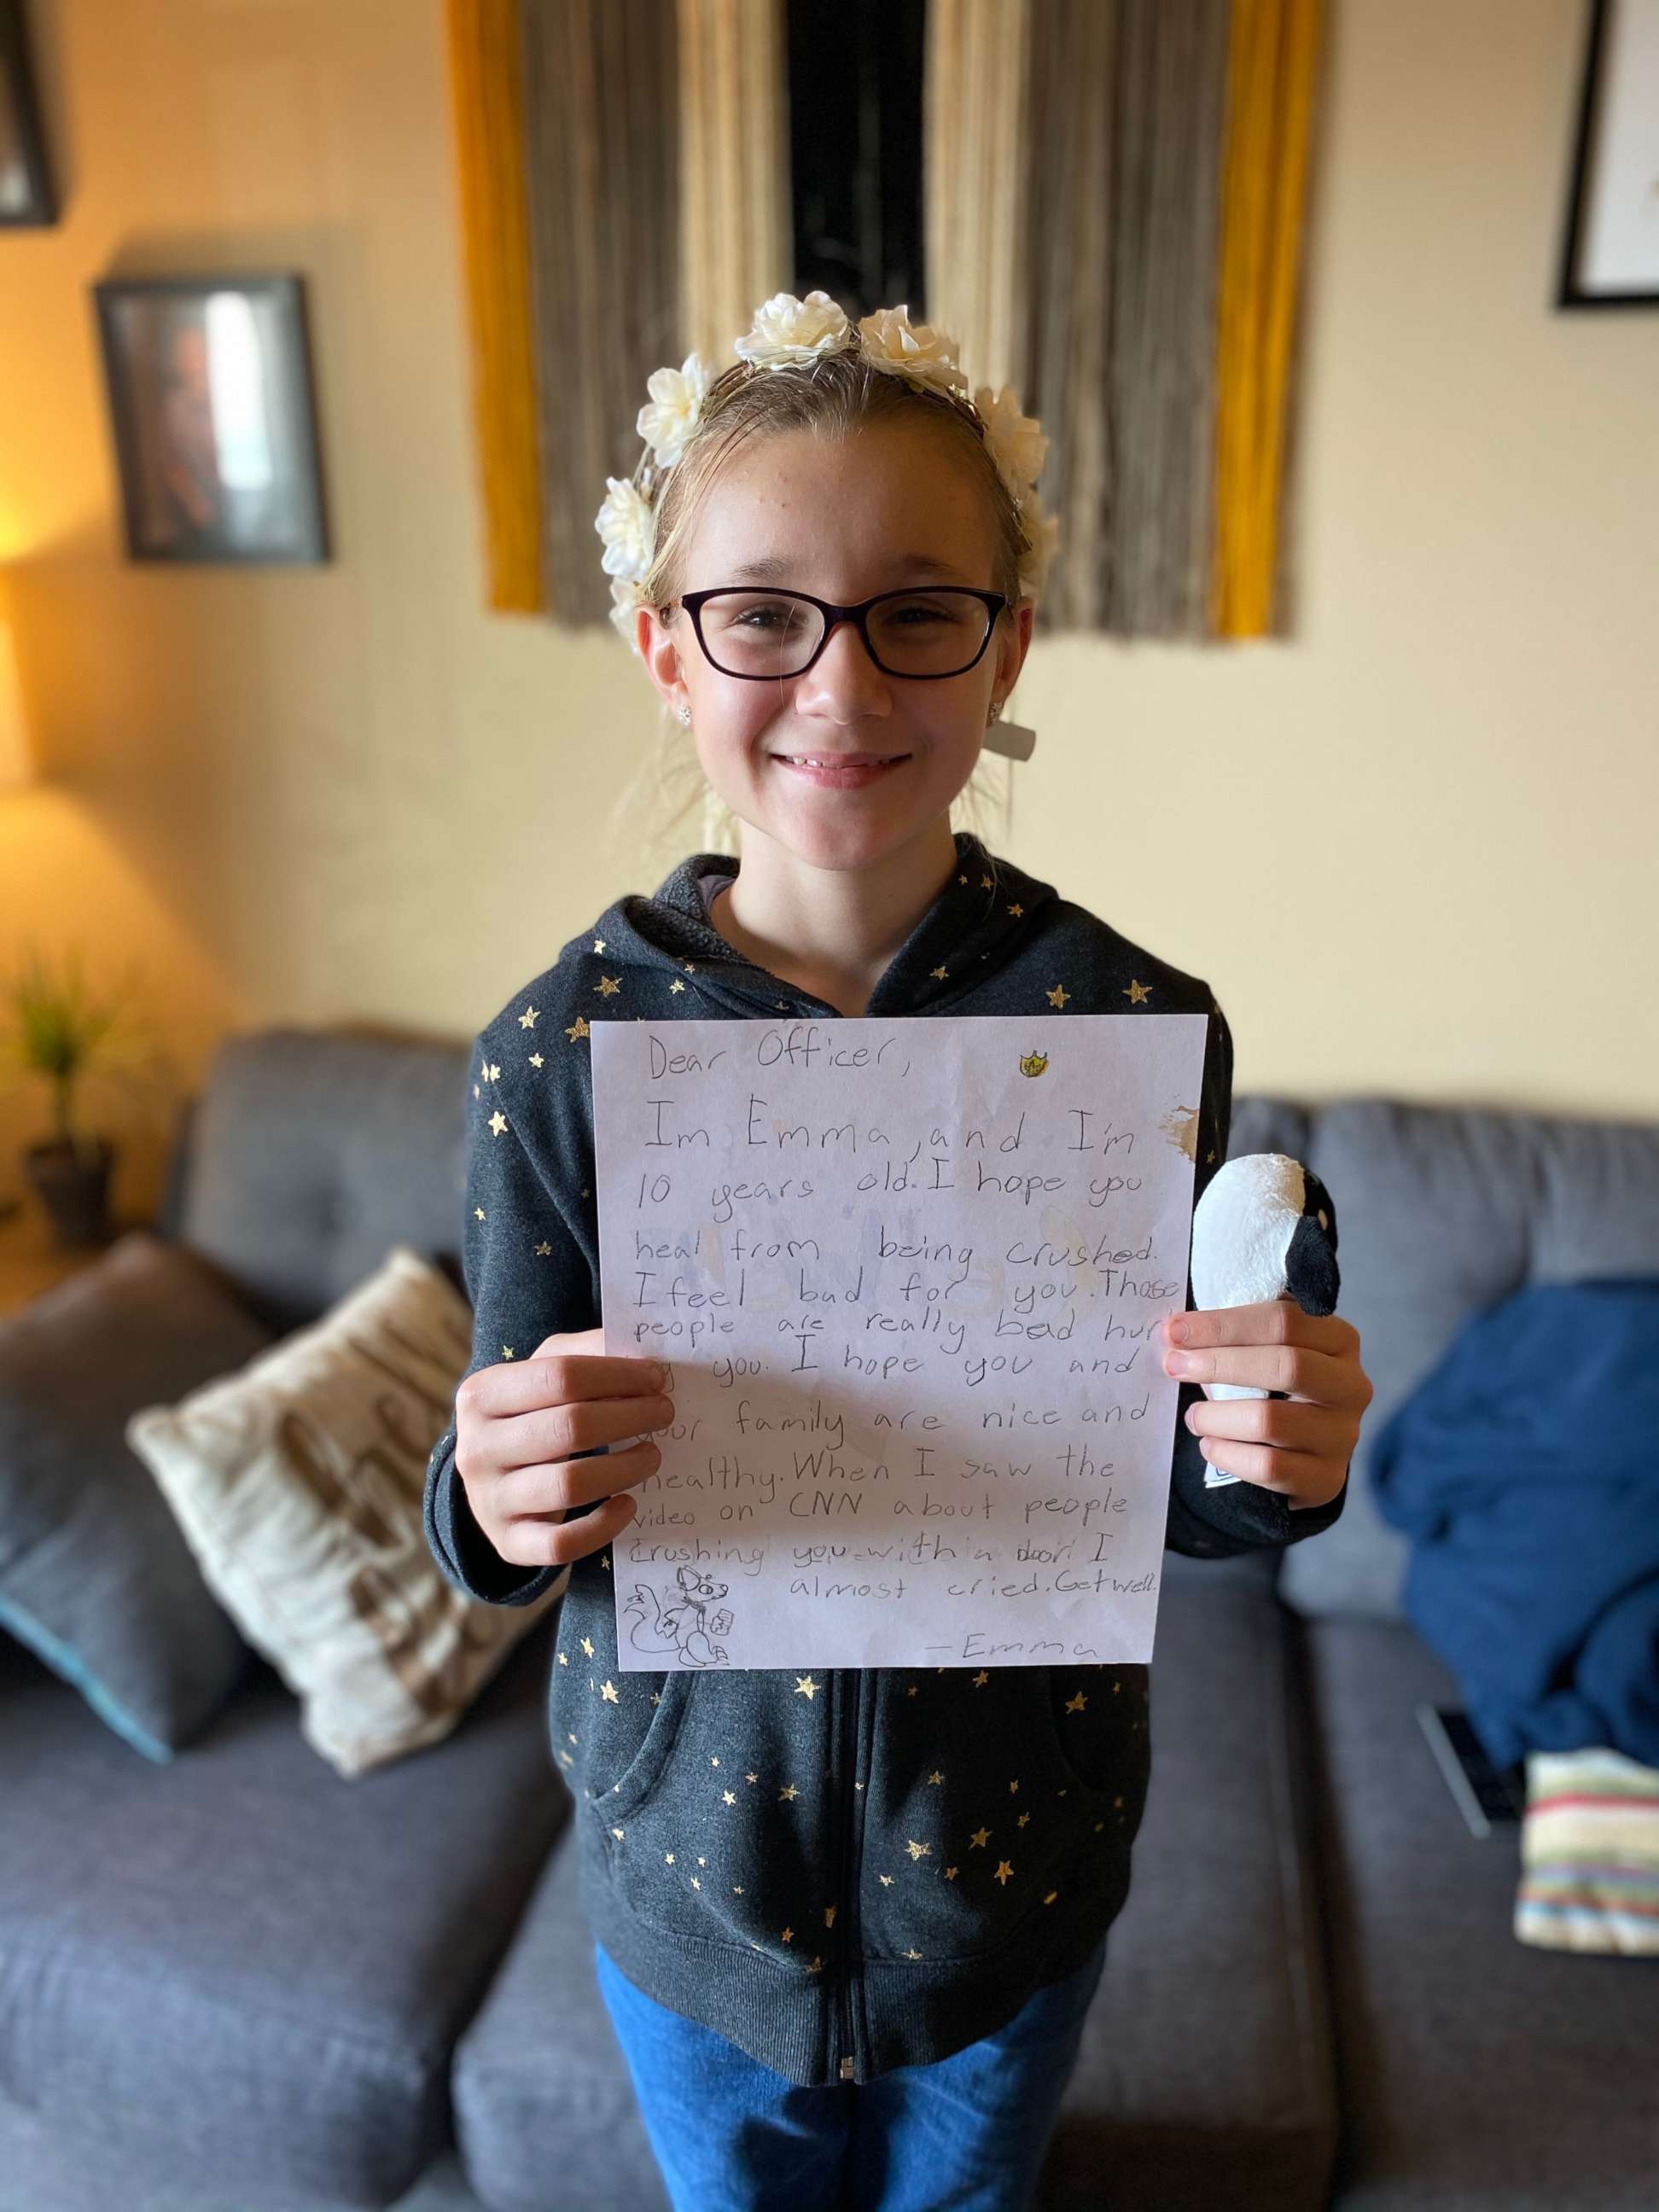 PHOTO: Johnna Jablonski, of Billings, Montana, is mom to 10-year-old Emma Jablonski. She told "Good Morning America" that her daughter had seen news footage covering the now-viral video of Officer Daniel Hodges being crushed inside the Capitol building.